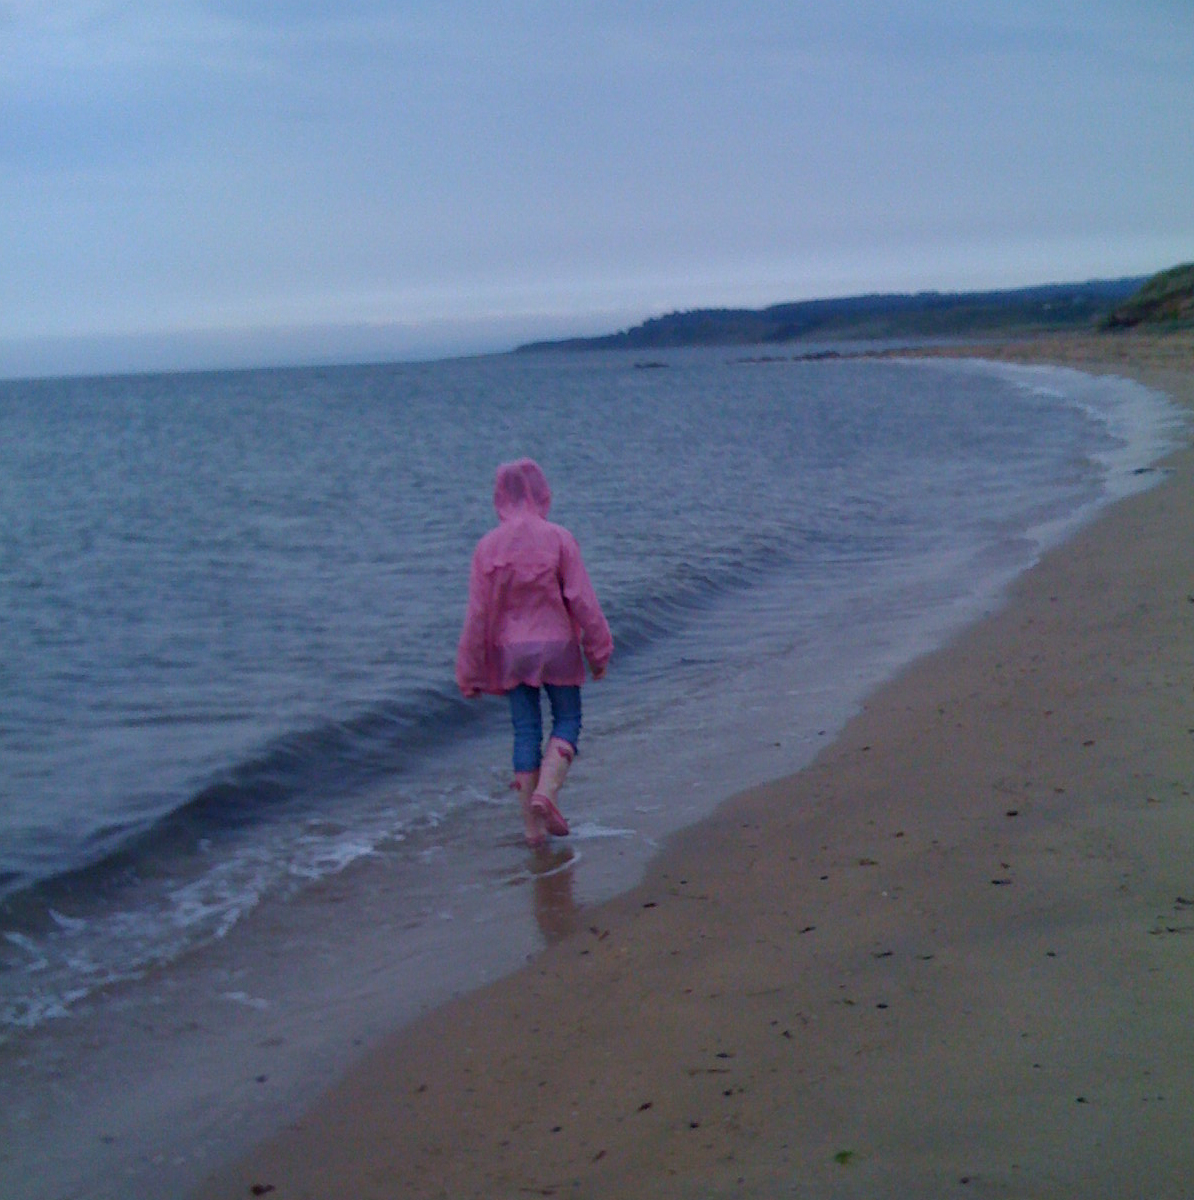 A young person dressed in a pink waterproof and wellies walking along the beach in the wash of the waves.